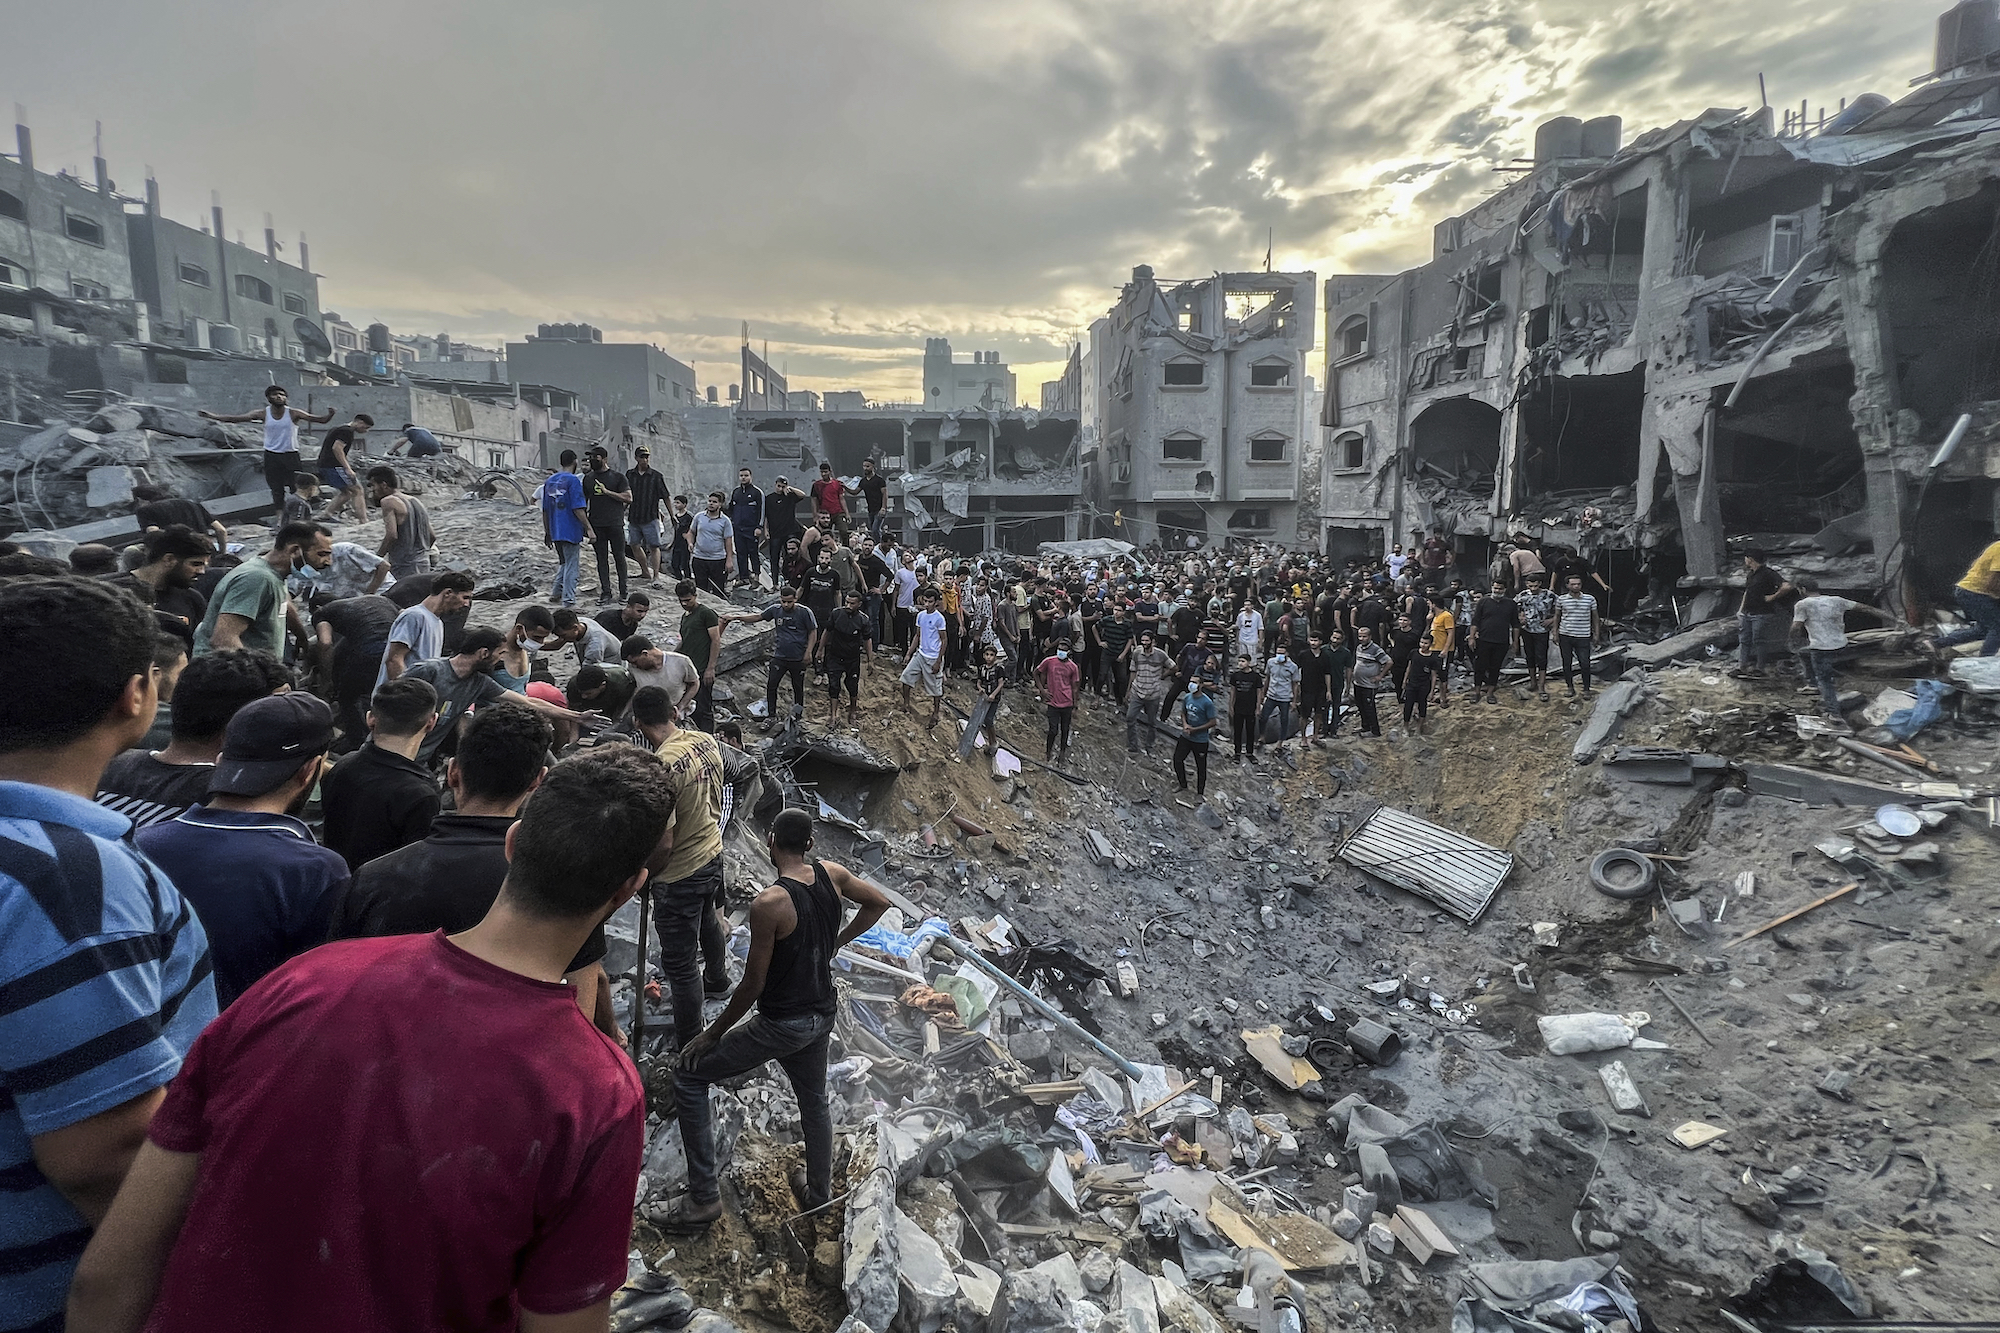 Palestinians search for survivors following an Israeli airstrike in the Jabalya refugee camp on Tuesday.